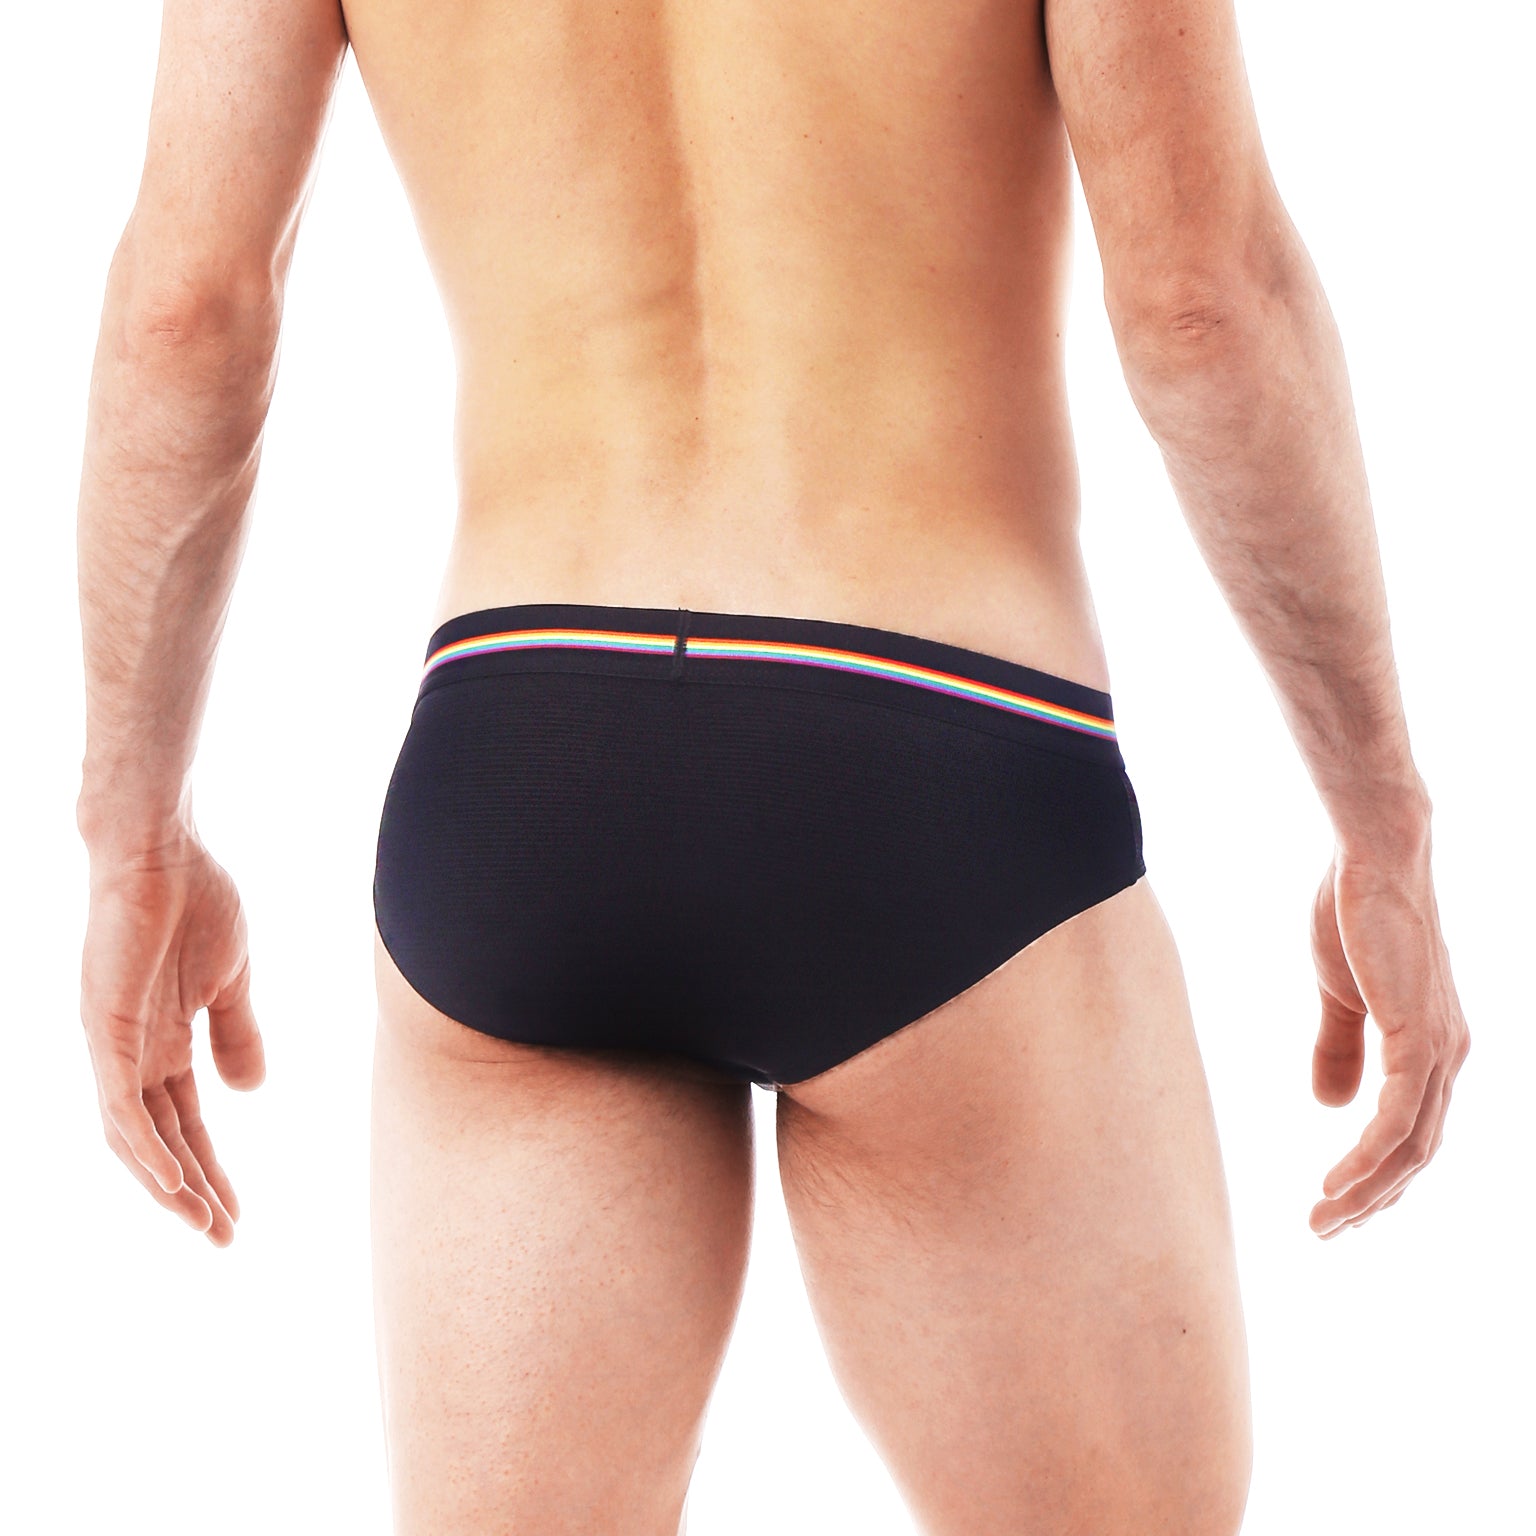 LIMITED PRIDE EDITION- Black Heather Mesh Low Rise Brief